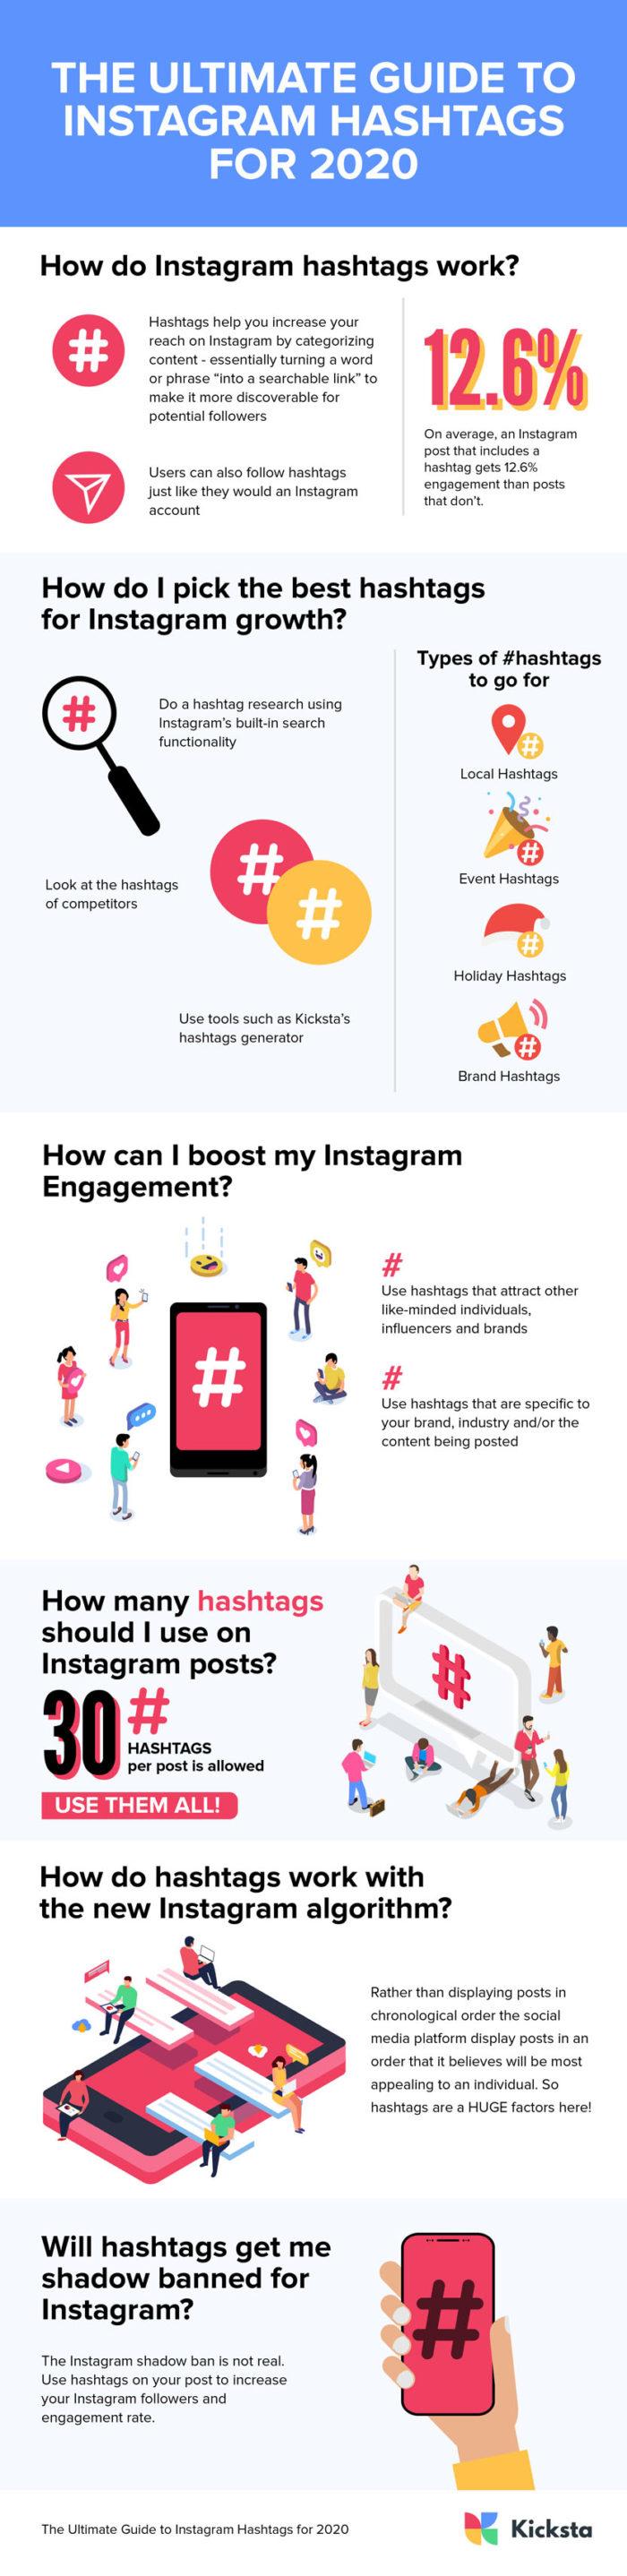 infographic on the ultimate guide to hashtags for Instagram